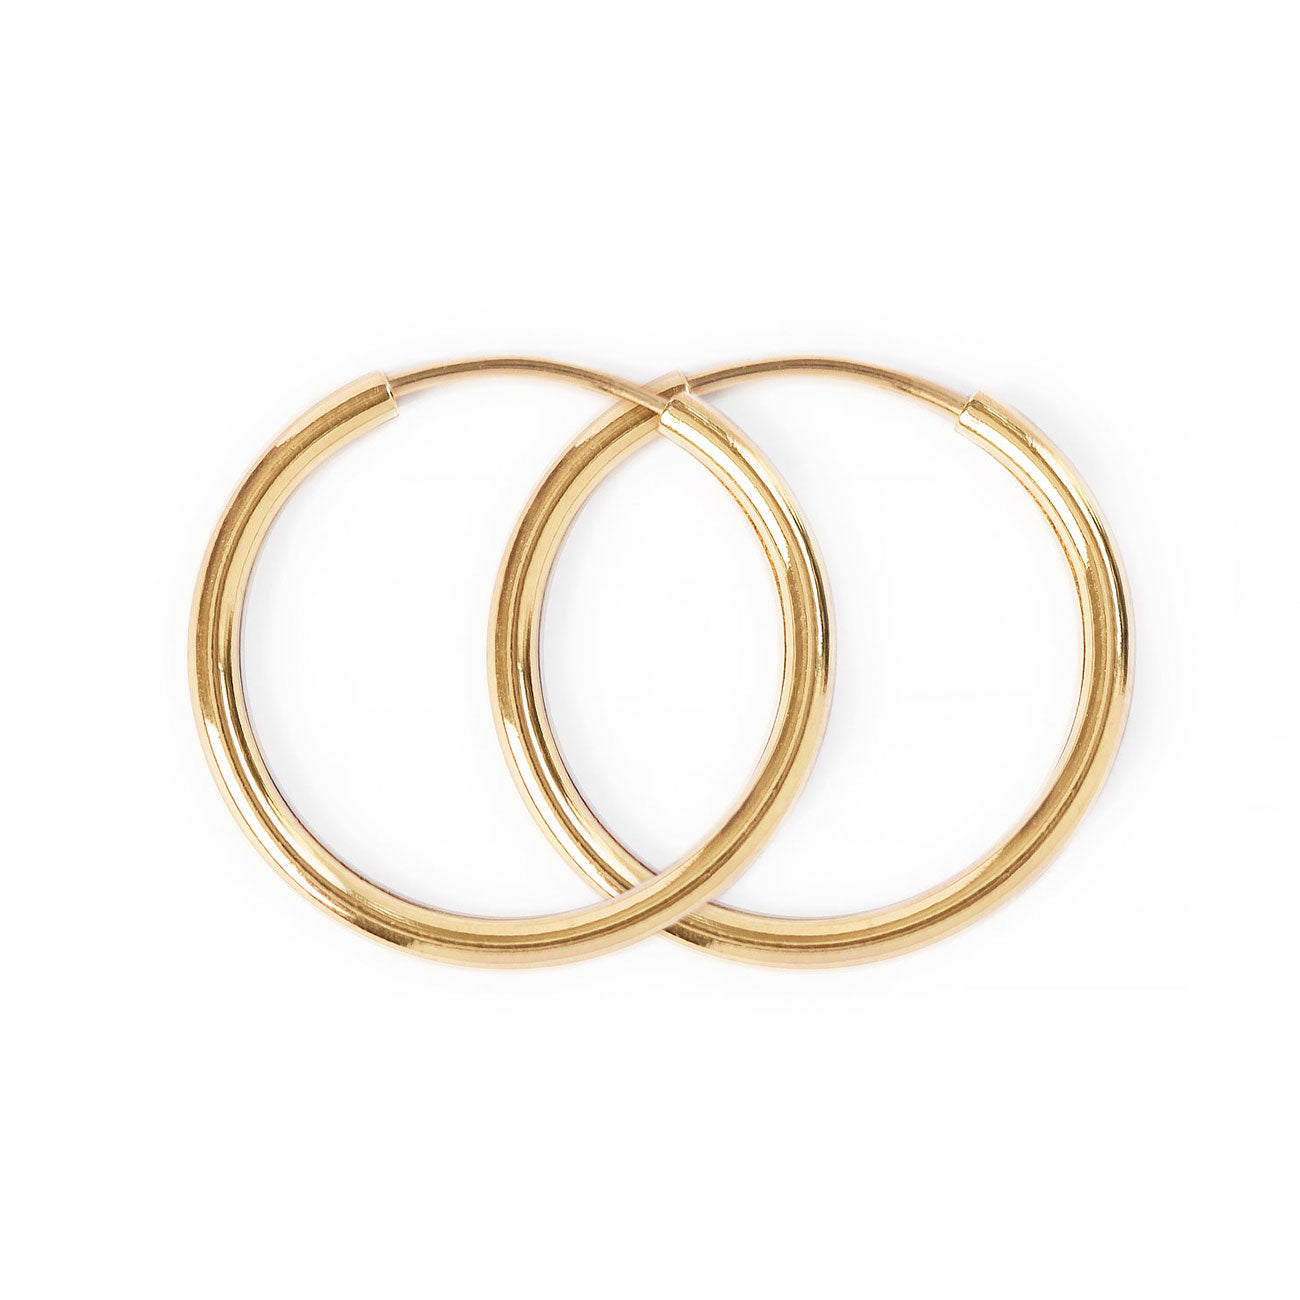 Round Gold 925 silver hoop earrings for women at Rs 999/pair in Jaipur |  ID: 27438918433